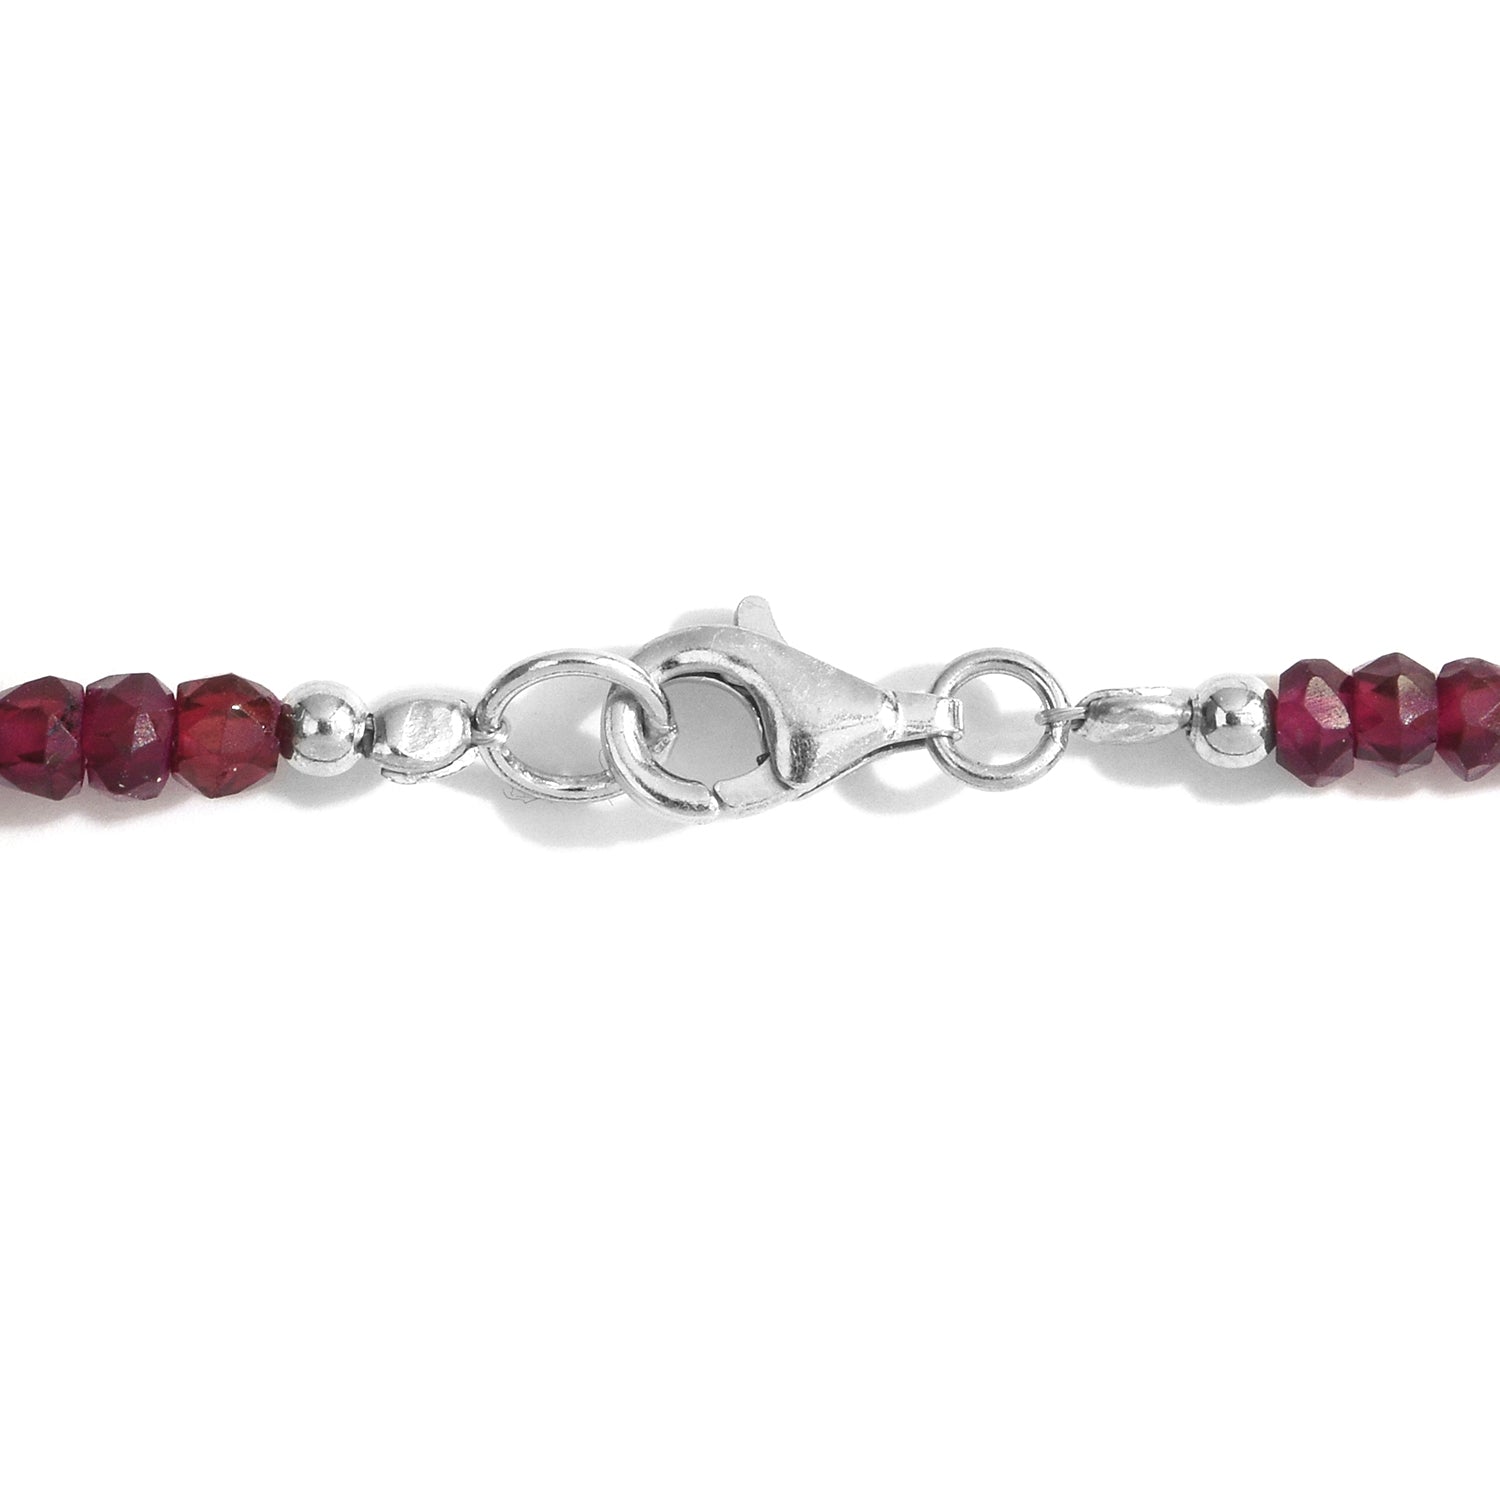 Call Me Baby Orissa Rhodolite Garnet Faceted Beads Sterling Silver Necklace (18 in) TGW 42.00 cts. - Houzz of DVA Boutique